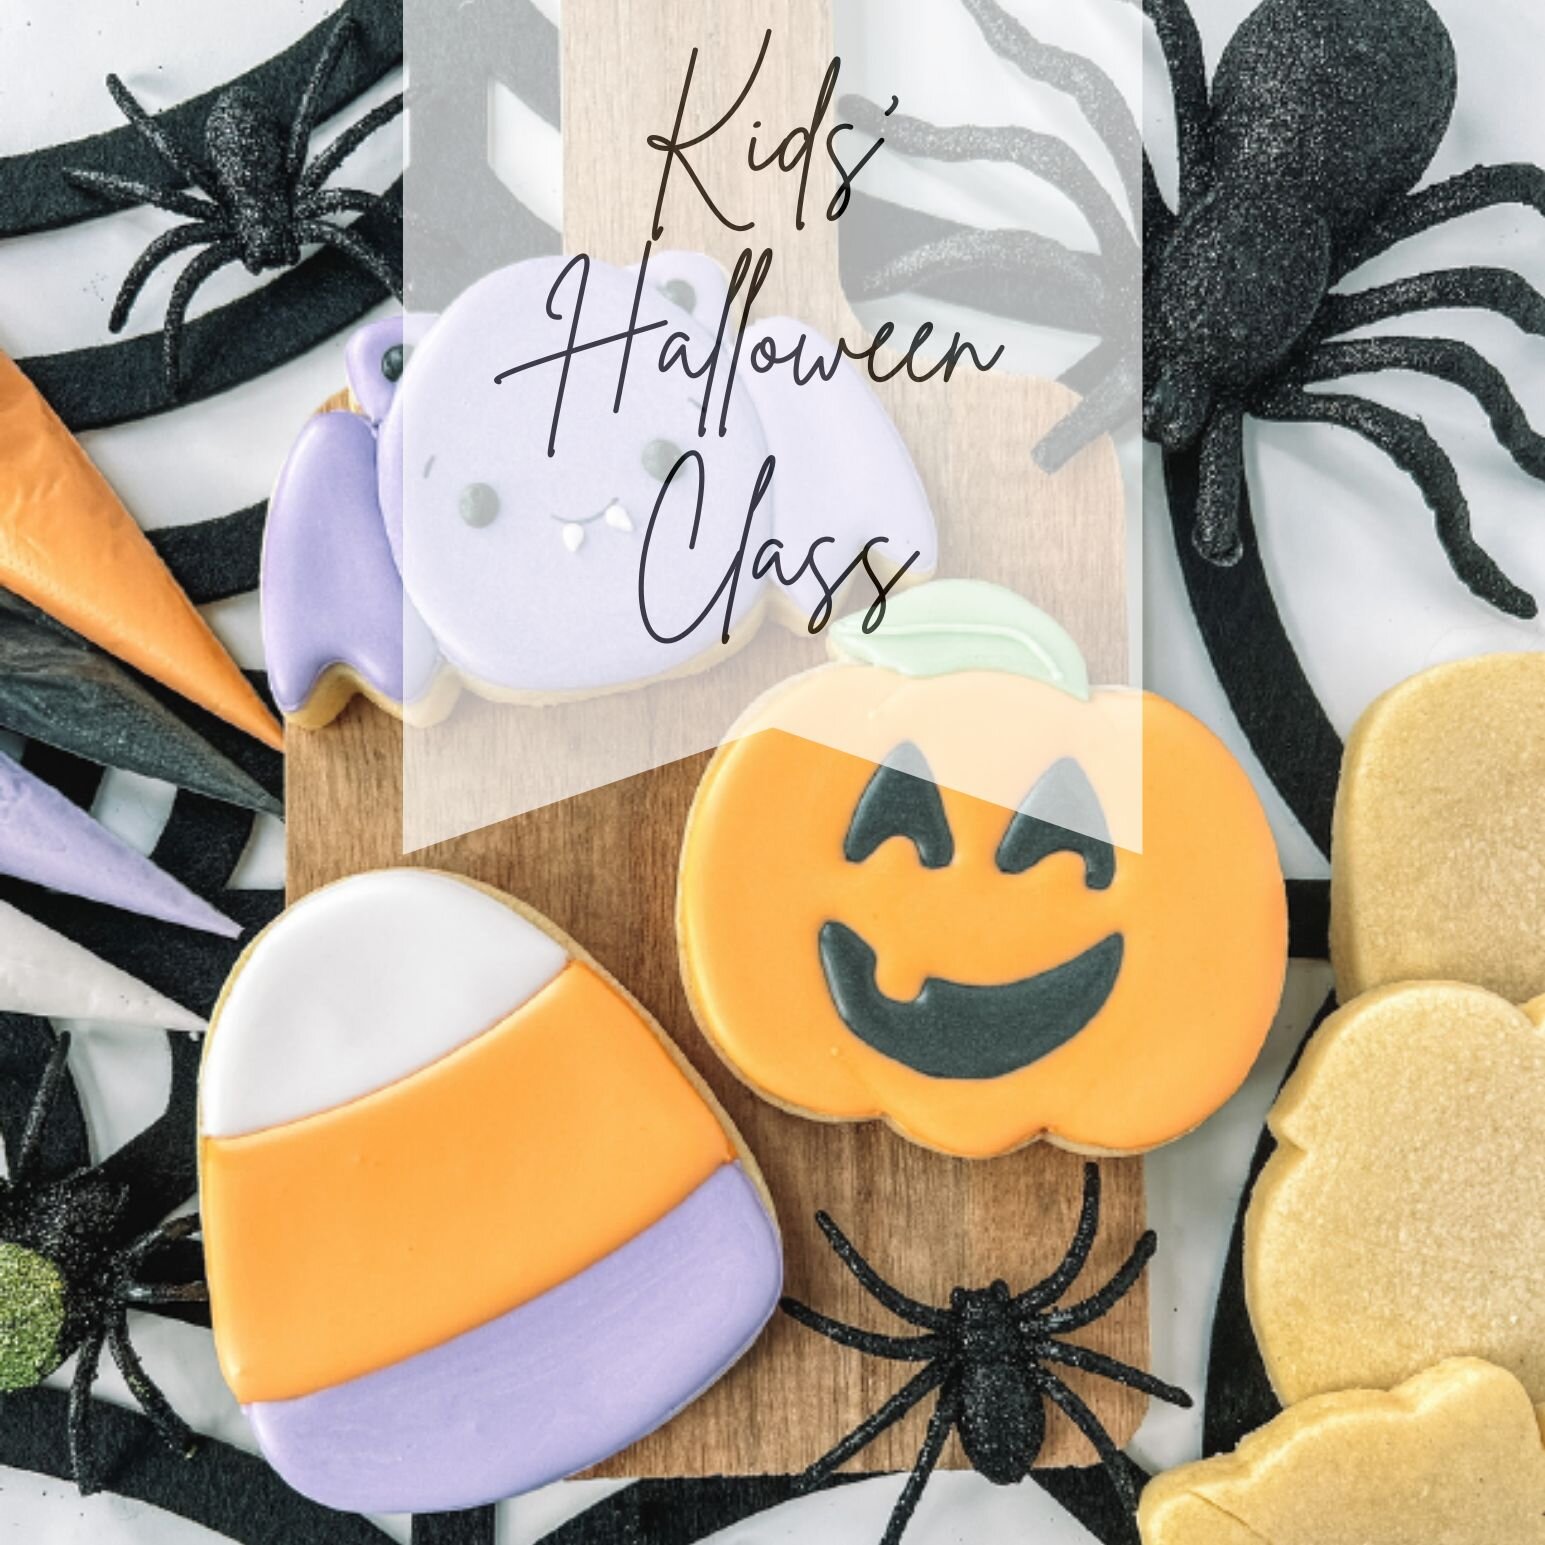 🎃🎄 Exciting News! 🎃🎄

Looking for a fun and festive activity for your little ones this Halloween and Christmas? Look no further! 🎉 I am delighted to announce that I am offering at home sugar cookie decorating classes specifically designed for ki